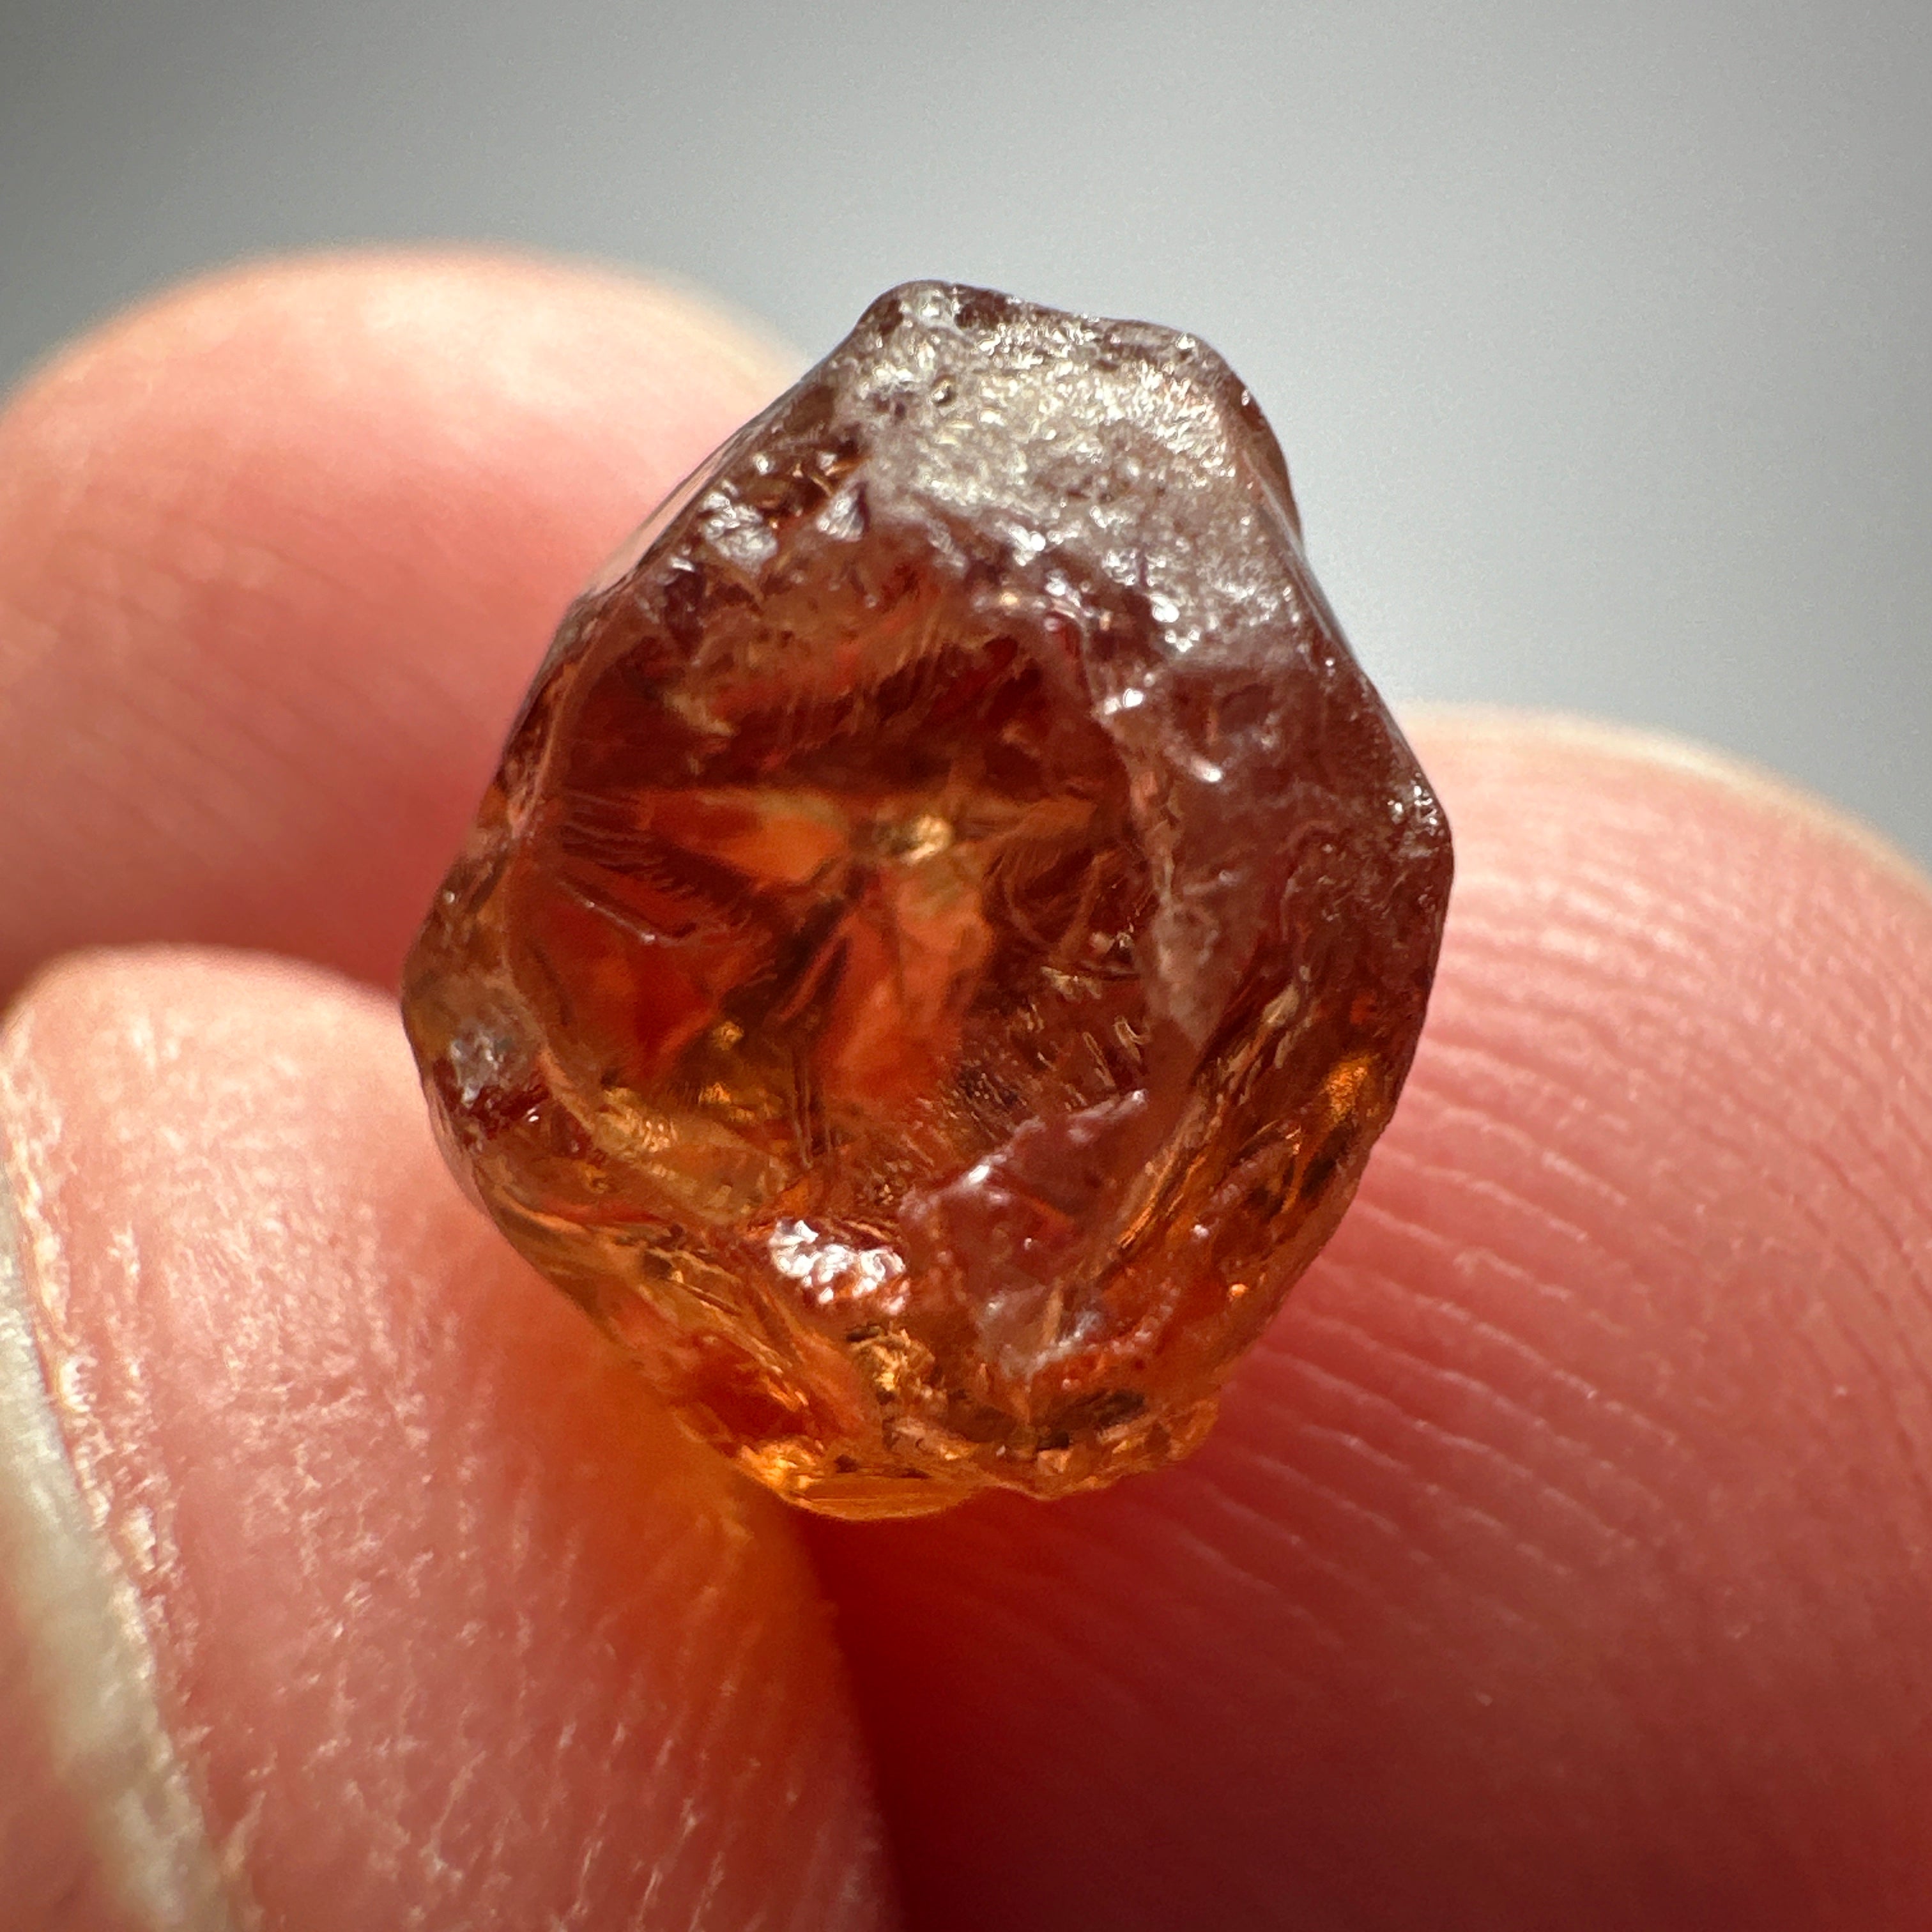 4.77ct Colour Change Garnet, Tanzania, Untreated Unheated, vvs-if with a very slight inclusion on the skin on the outside